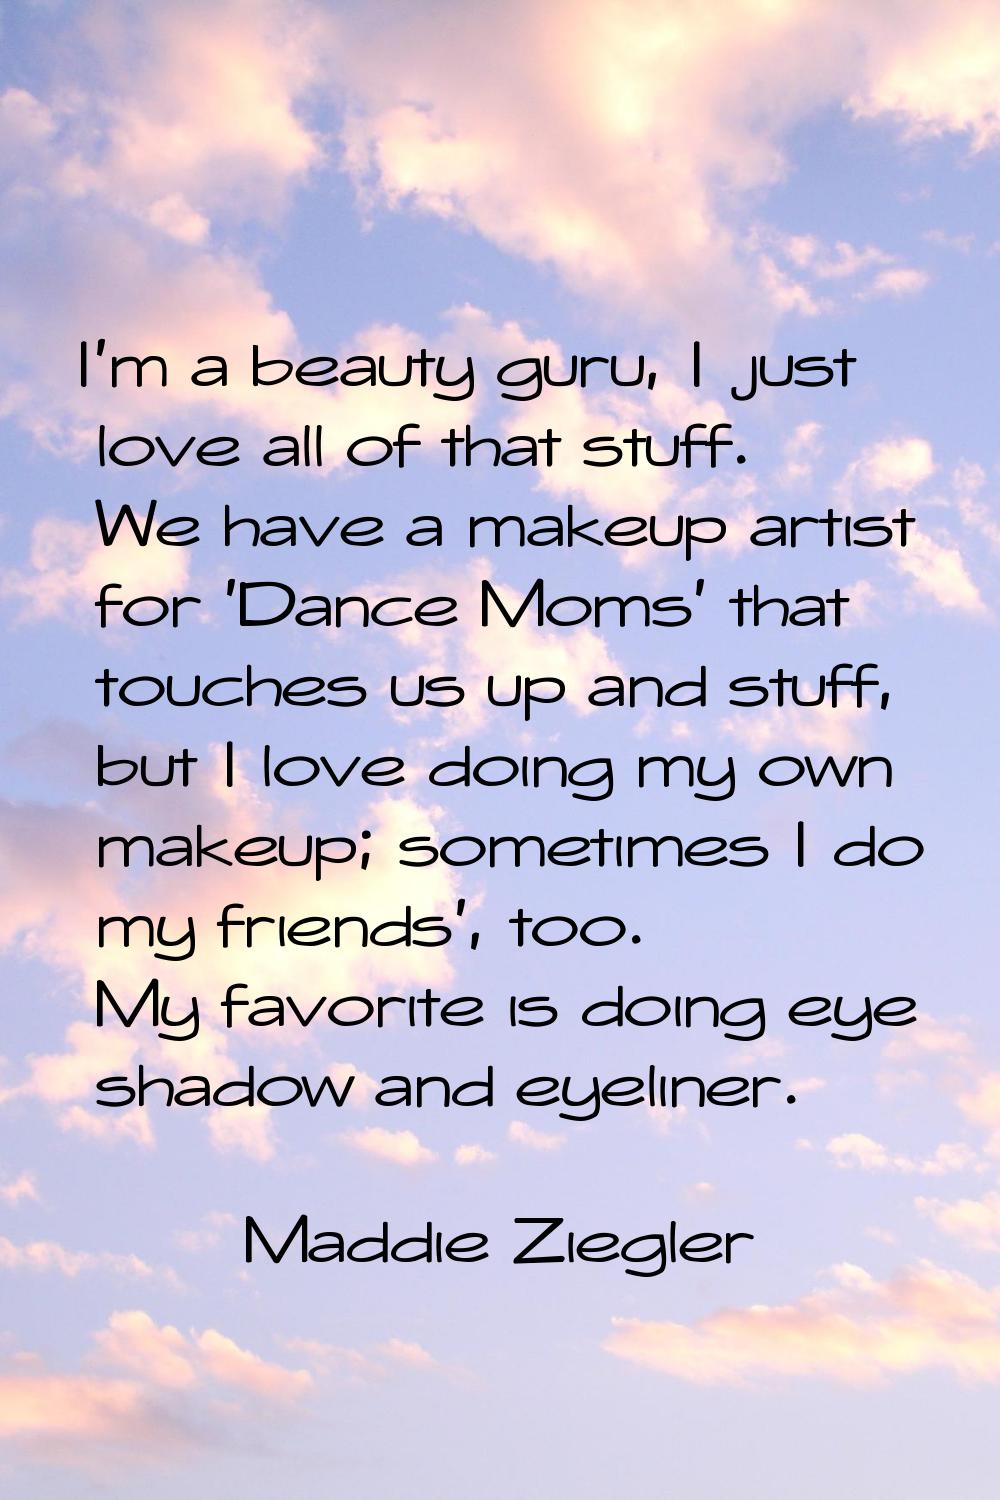 I'm a beauty guru, I just love all of that stuff. We have a makeup artist for 'Dance Moms' that tou